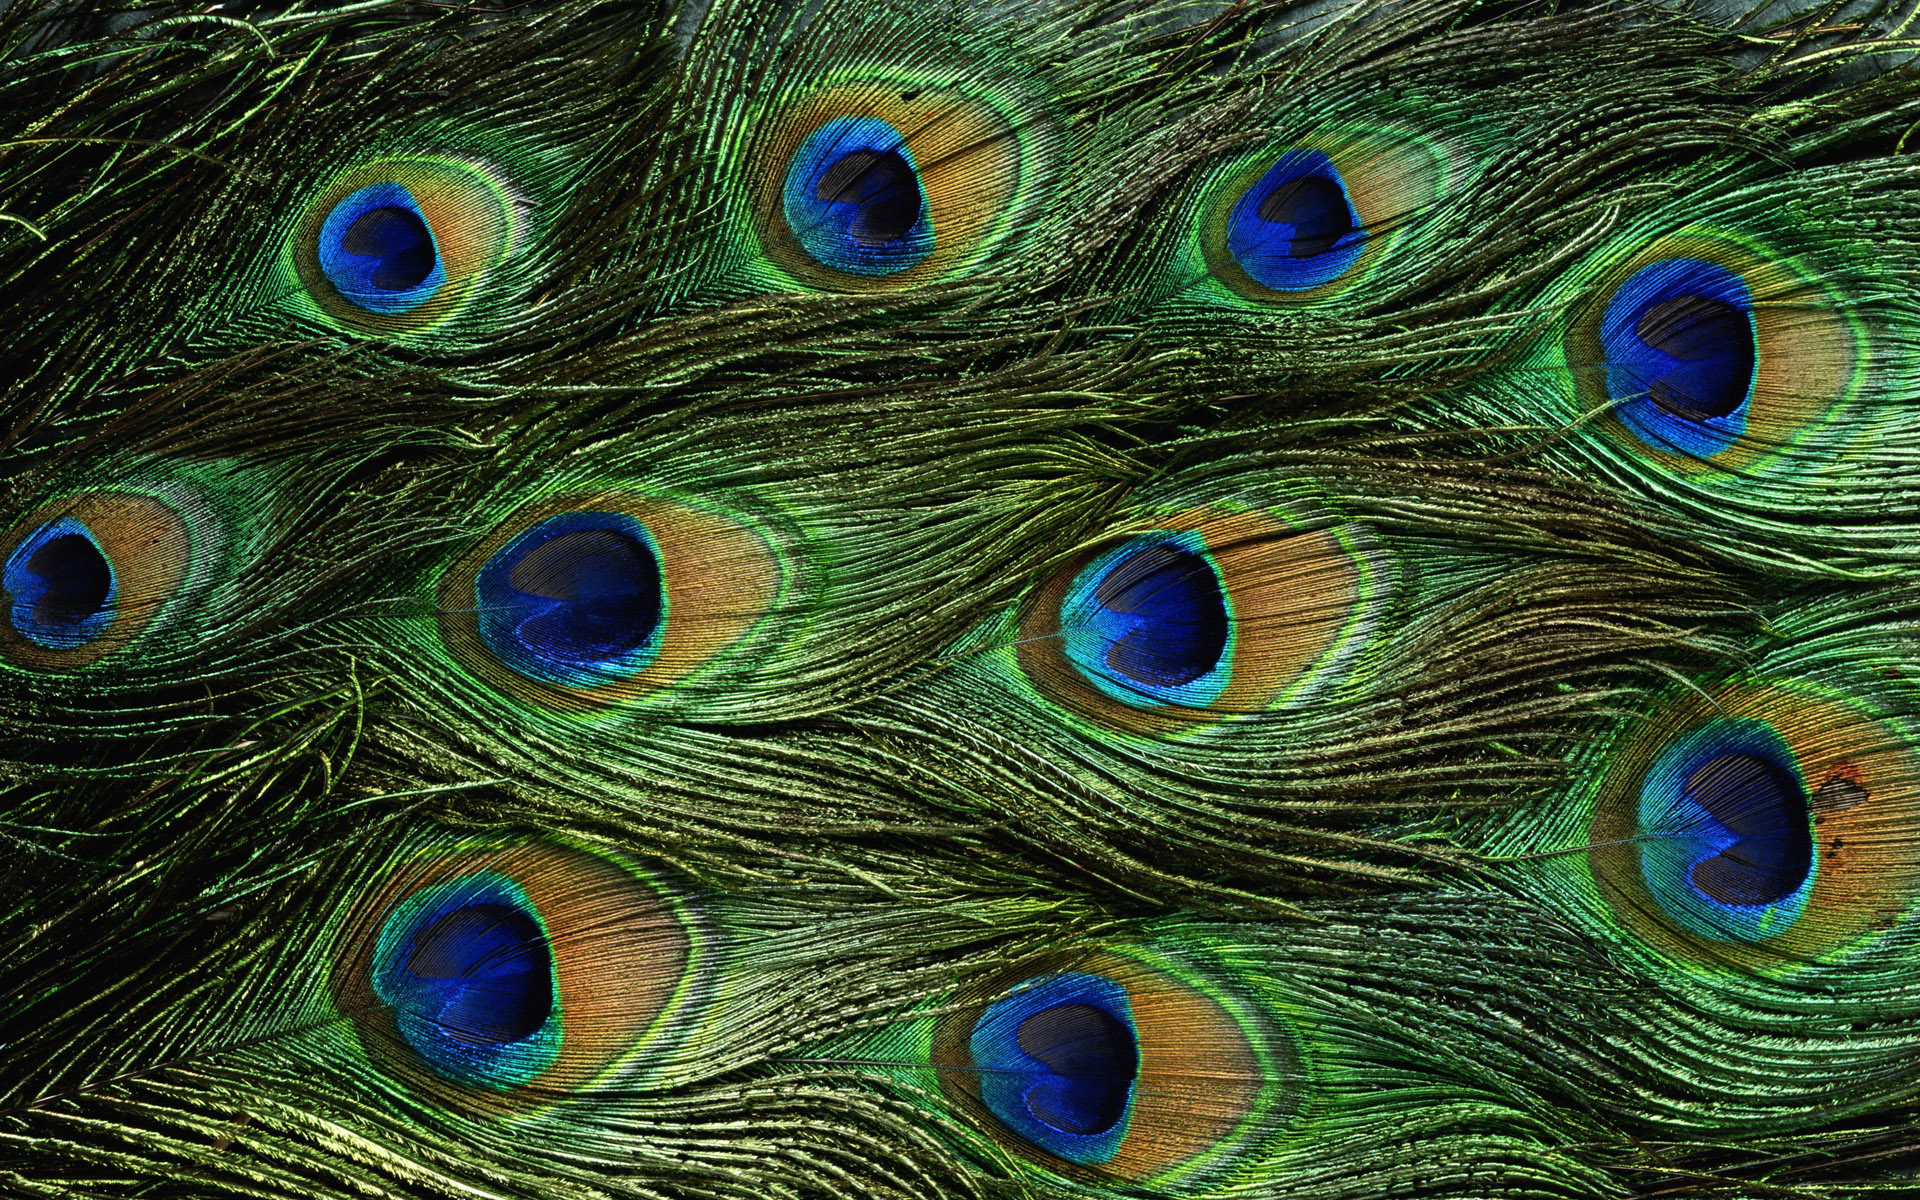 Peacock Feathers Texture HD Wallpaper